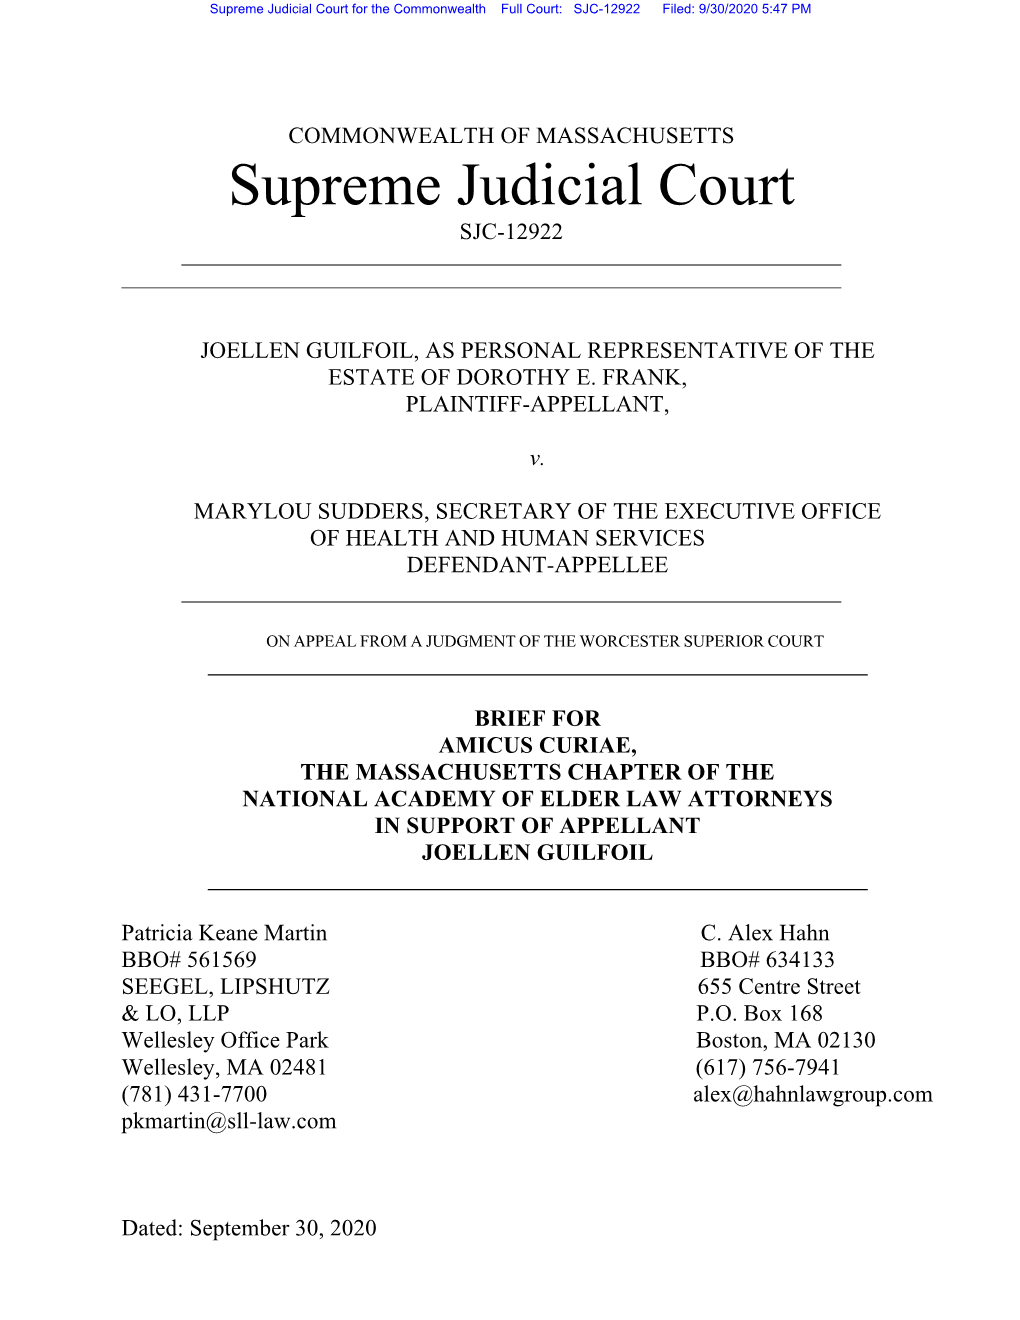 Supreme Judicial Court for the Commonwealth Full Court: SJC-12922 Filed: 9/30/2020 5:47 PM